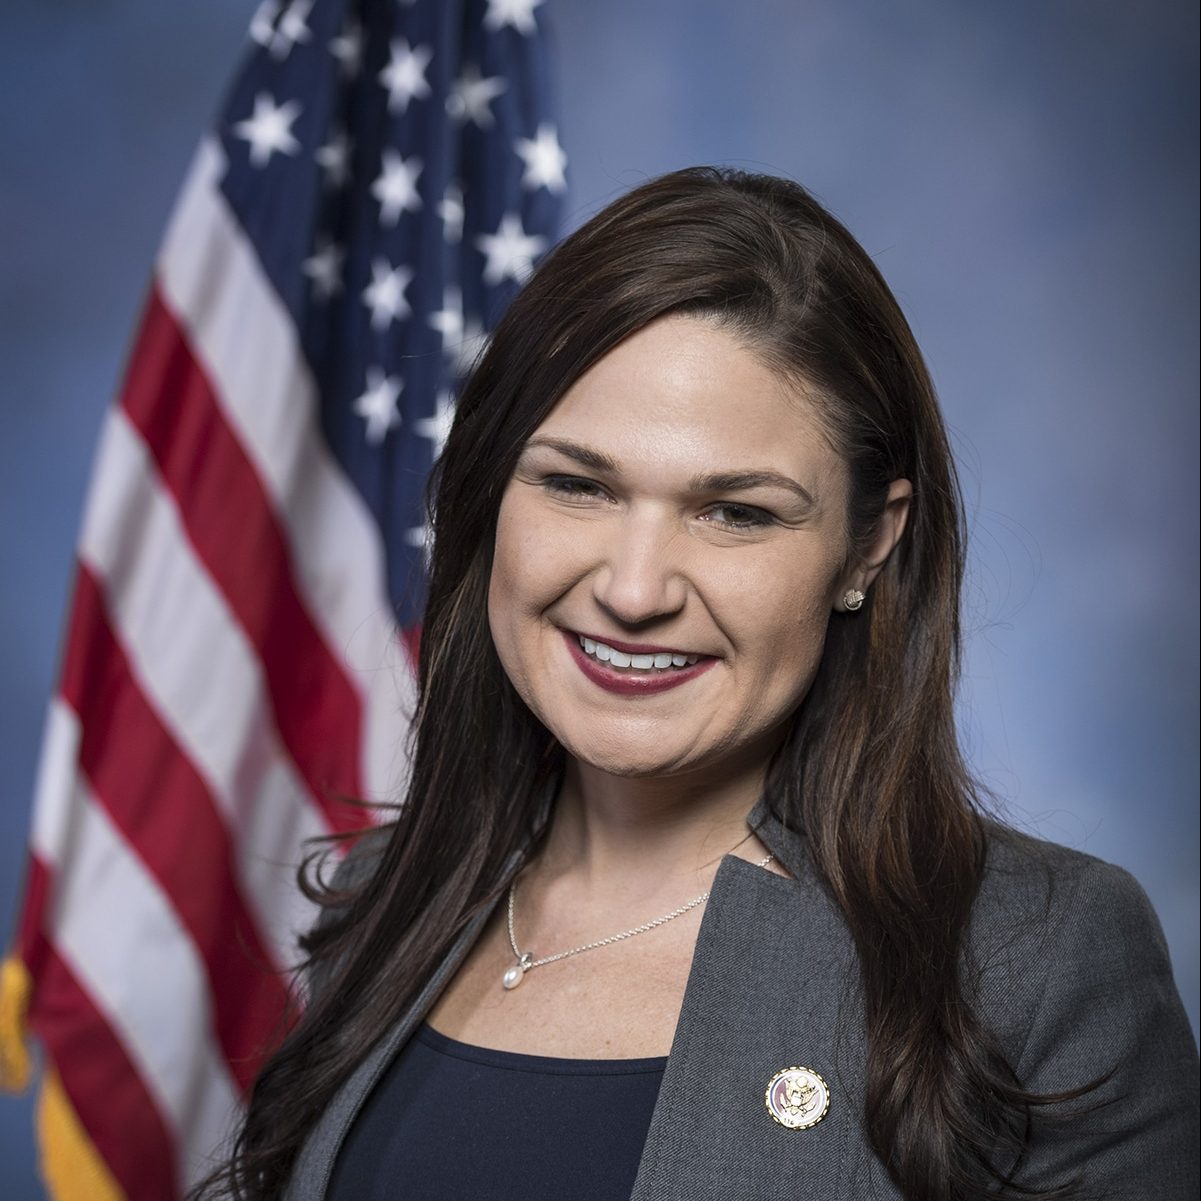 Rep. Finkenauer Targets Student Loan Relief to Revitalize Rural Areas